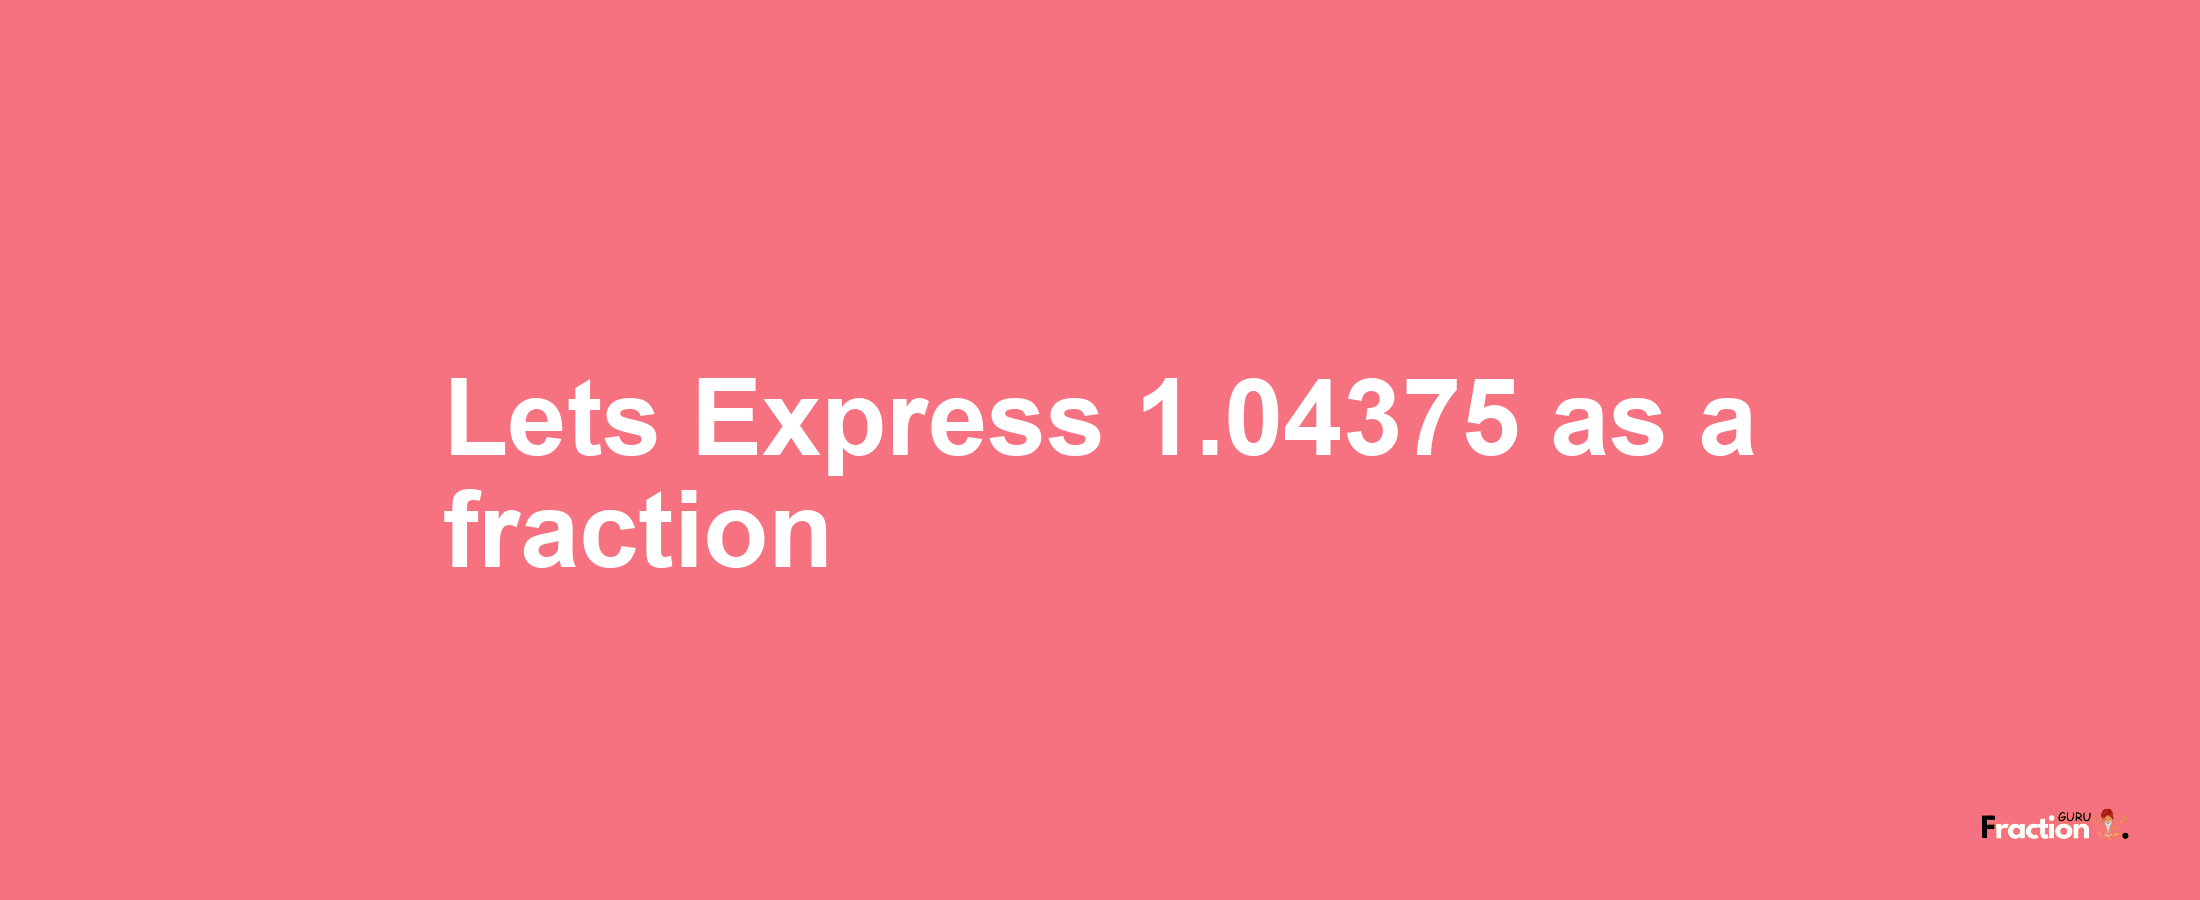 Lets Express 1.04375 as afraction